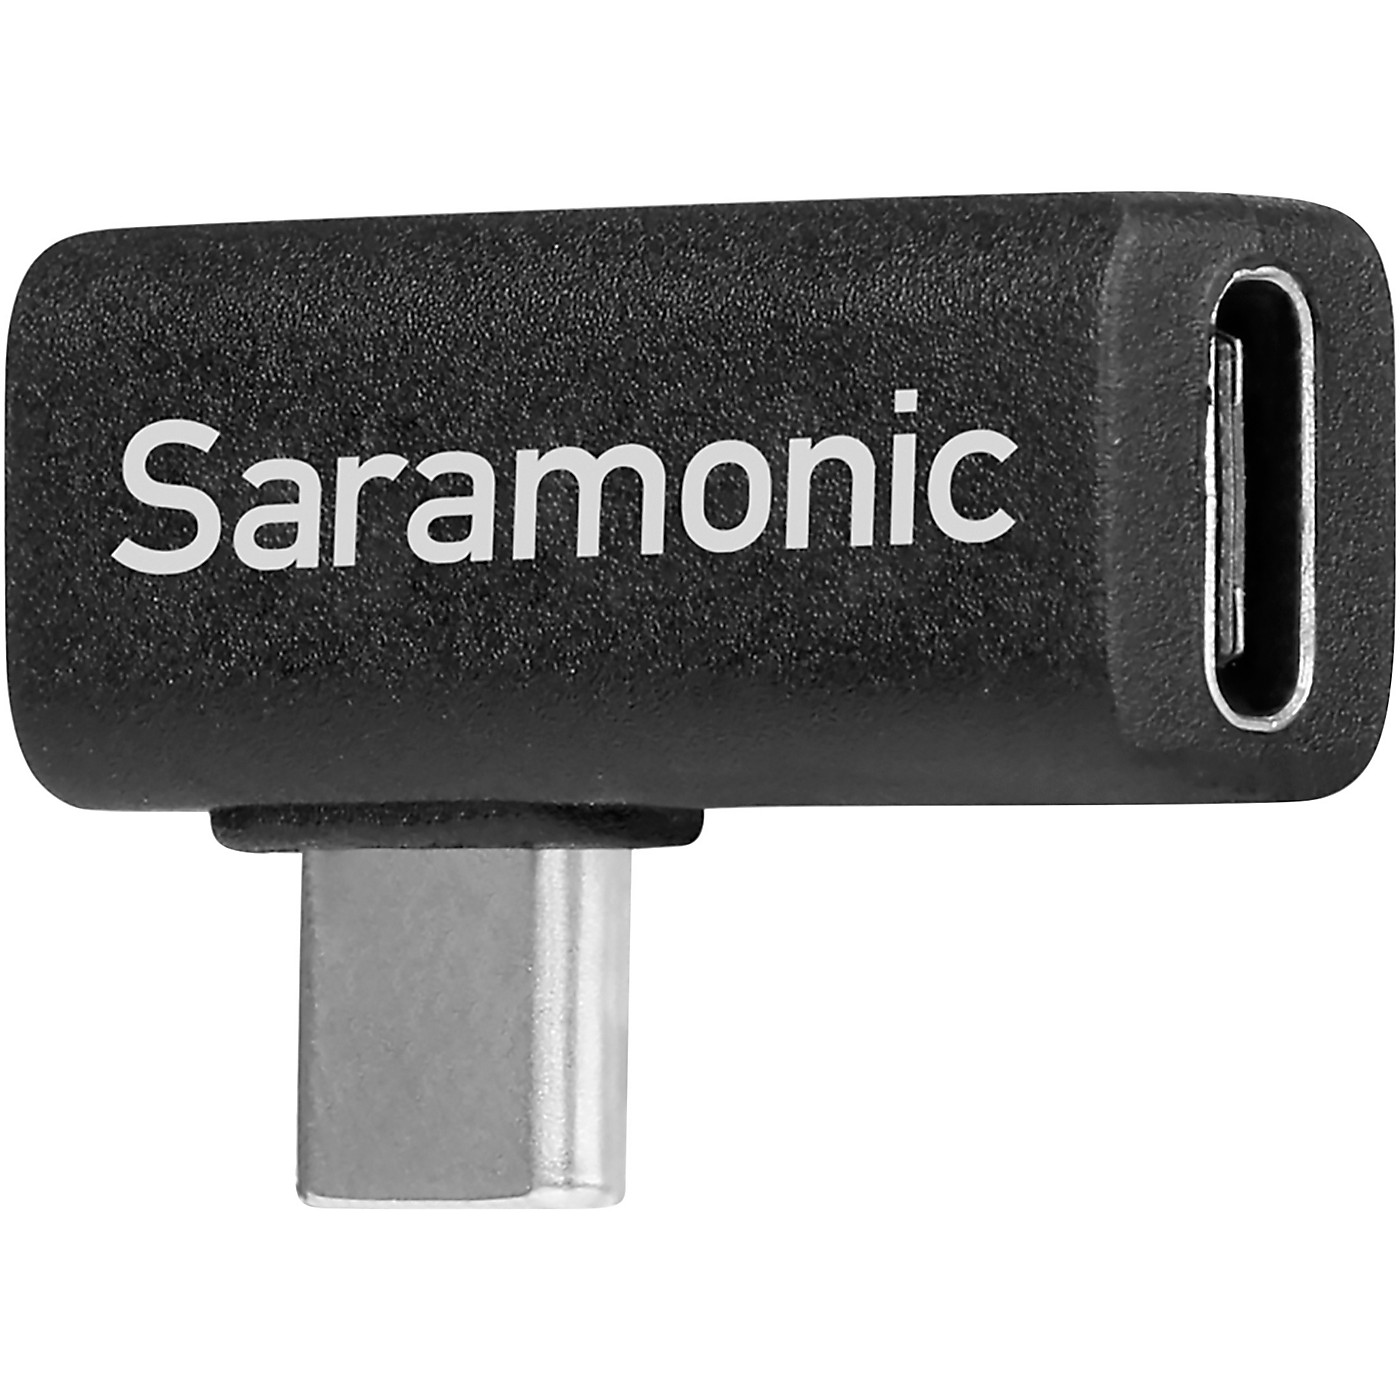 Saramonic SR-C2005 Right-Angle USB-C Adapter, 90-Degree Male-to-Female Type-C Adapter Ideal for Devices in Gimbals & Tight Spaces thumbnail